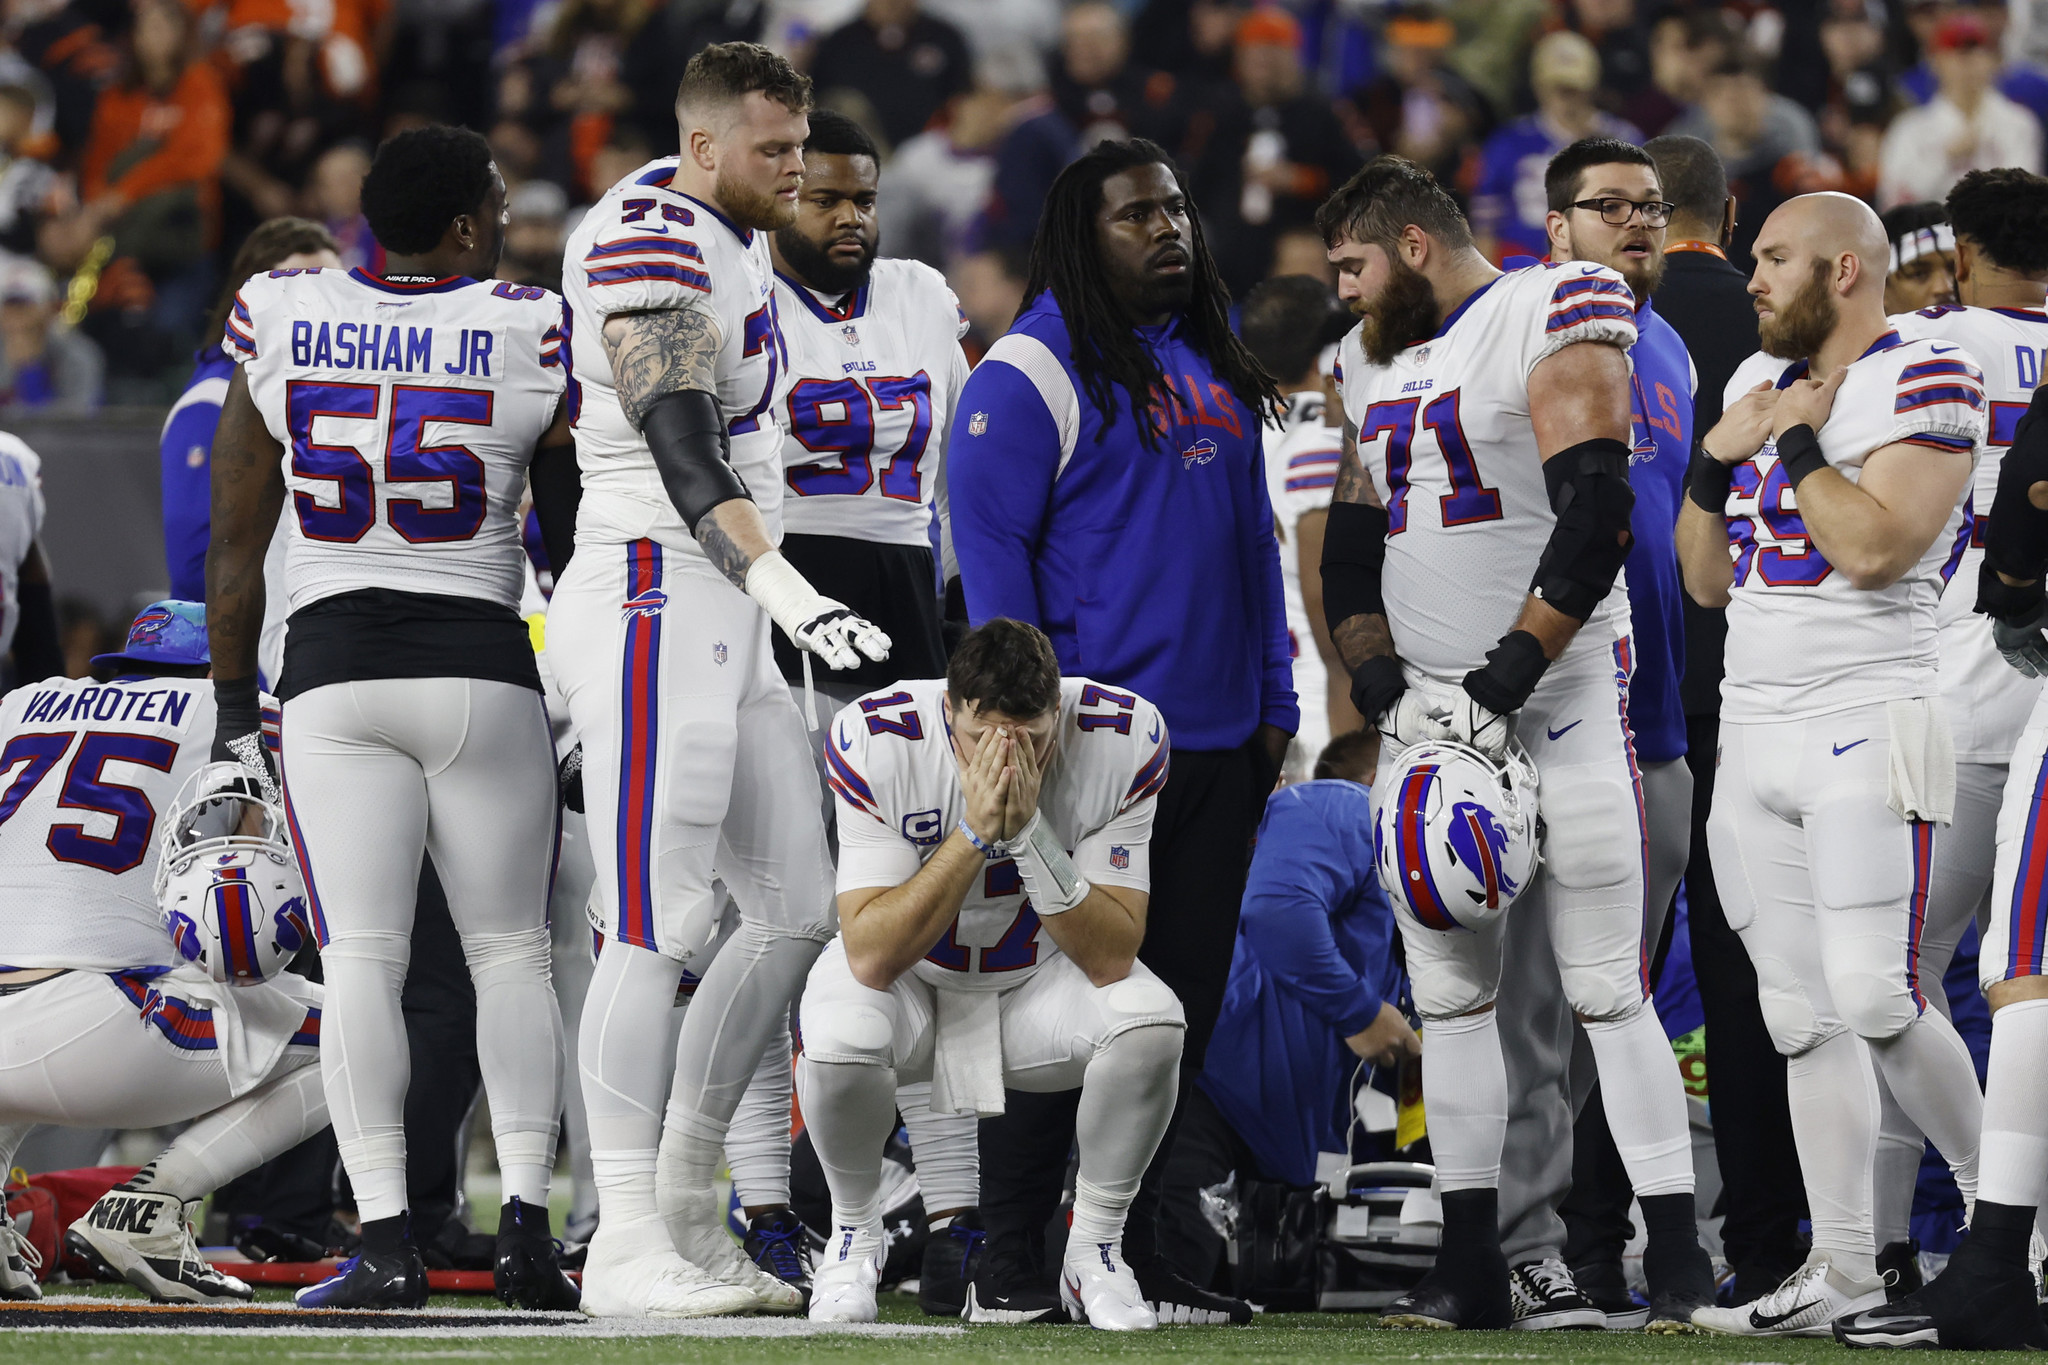 Bills S Damar Hamlin expected to be inactive for MNF